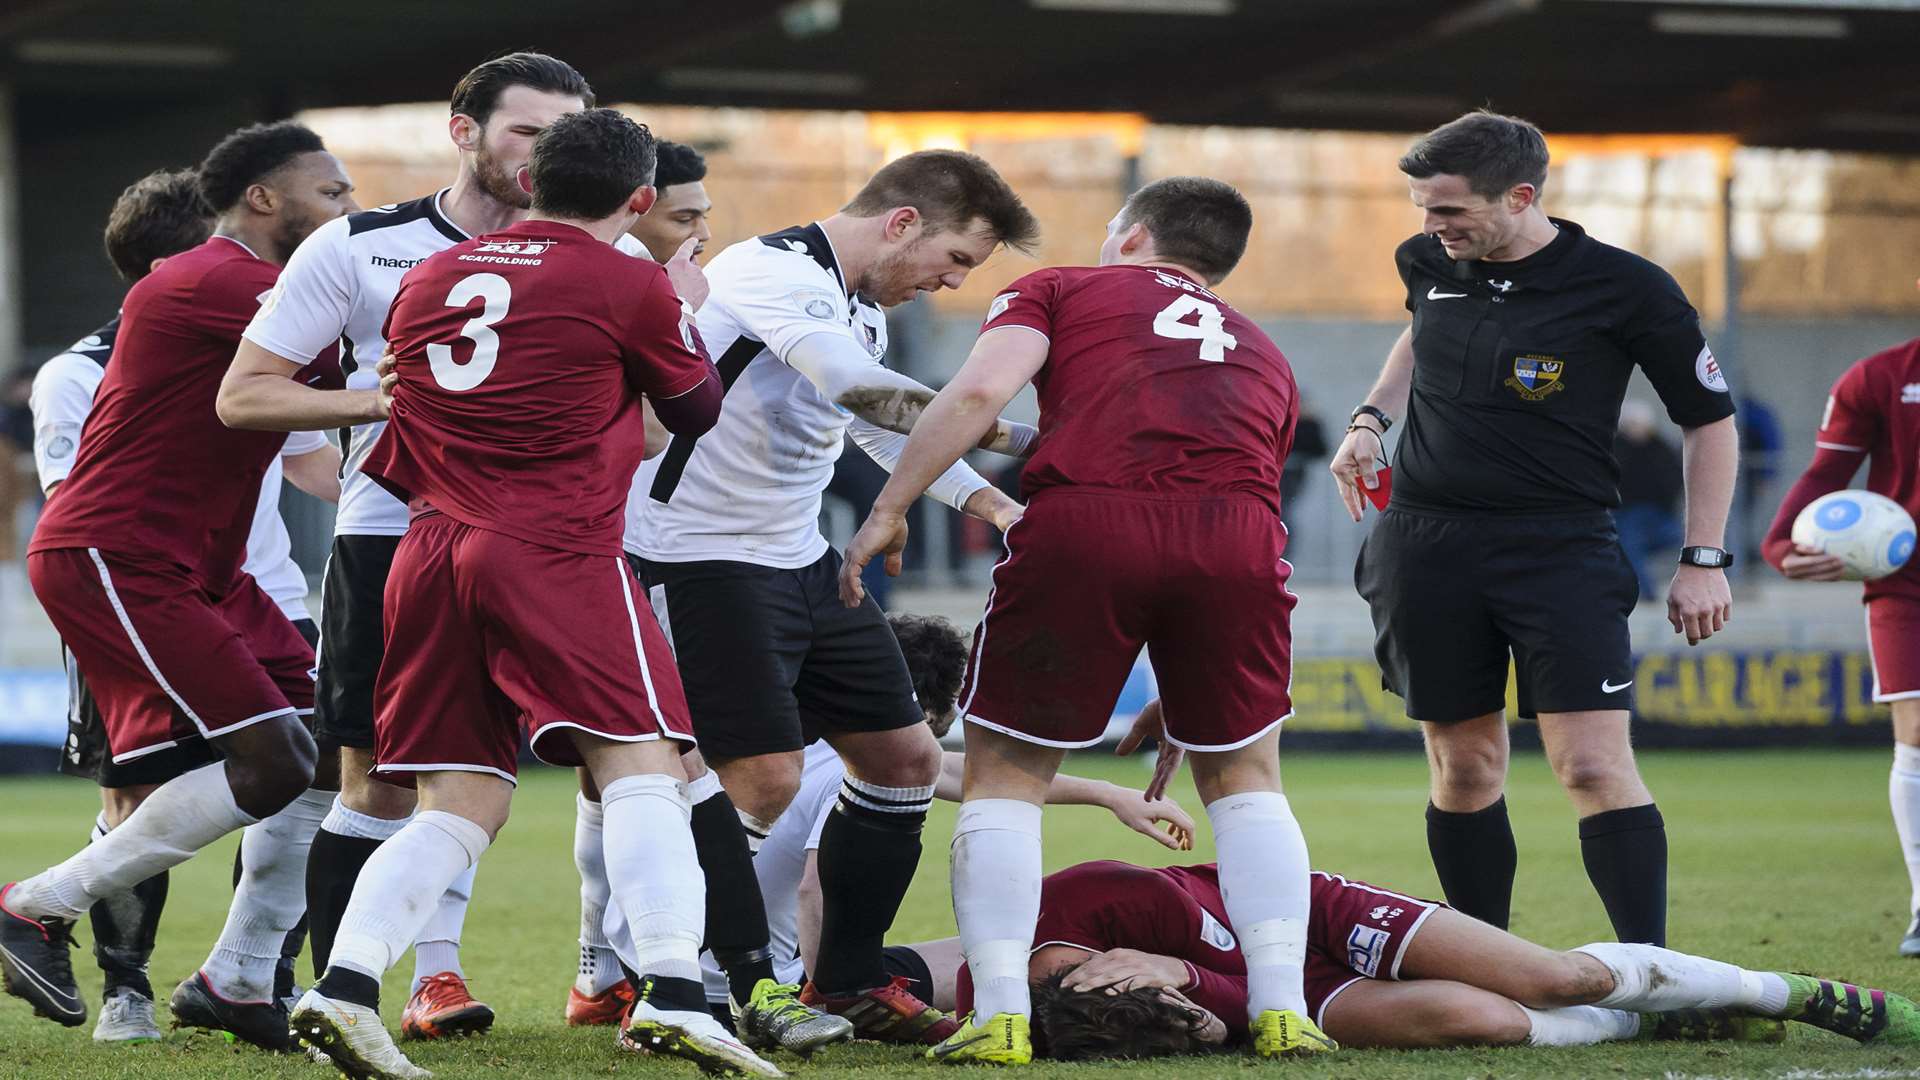 Referee Craig Hicks prepares to send off Alex Brown (on ground) folllowing a challenge on Chelmsford's Anthony Church which sparked off angry scenes between players of both teams Pic: Andy Payton